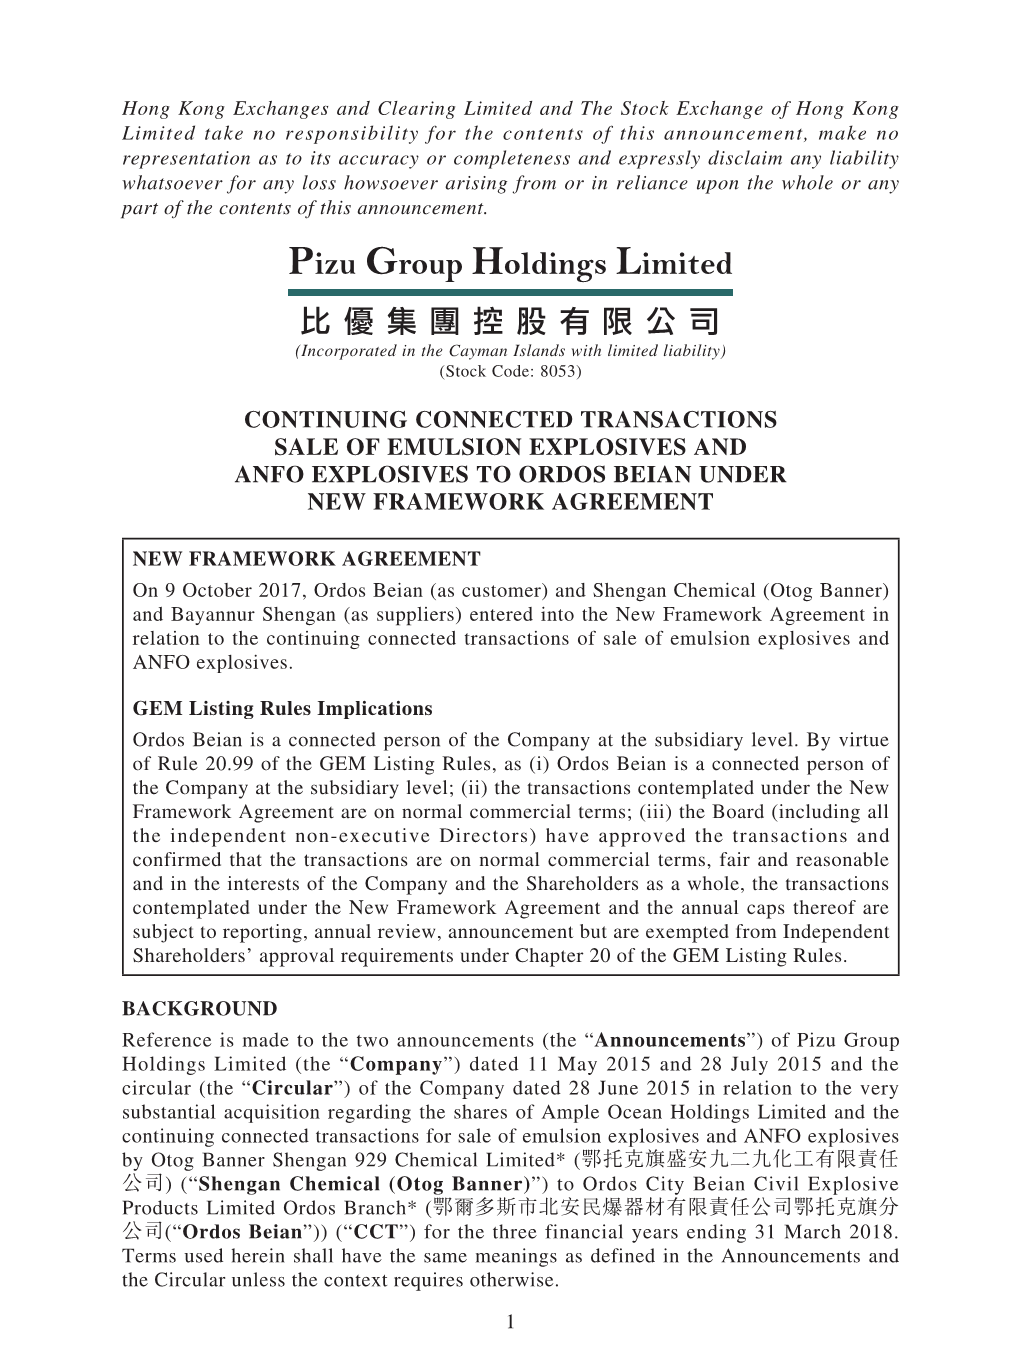 Pizu Group Holdings Limited 比優集團控股有限公司 (Incorporated in the Cayman Islands with Limited Liability) (Stock Code: 8053)